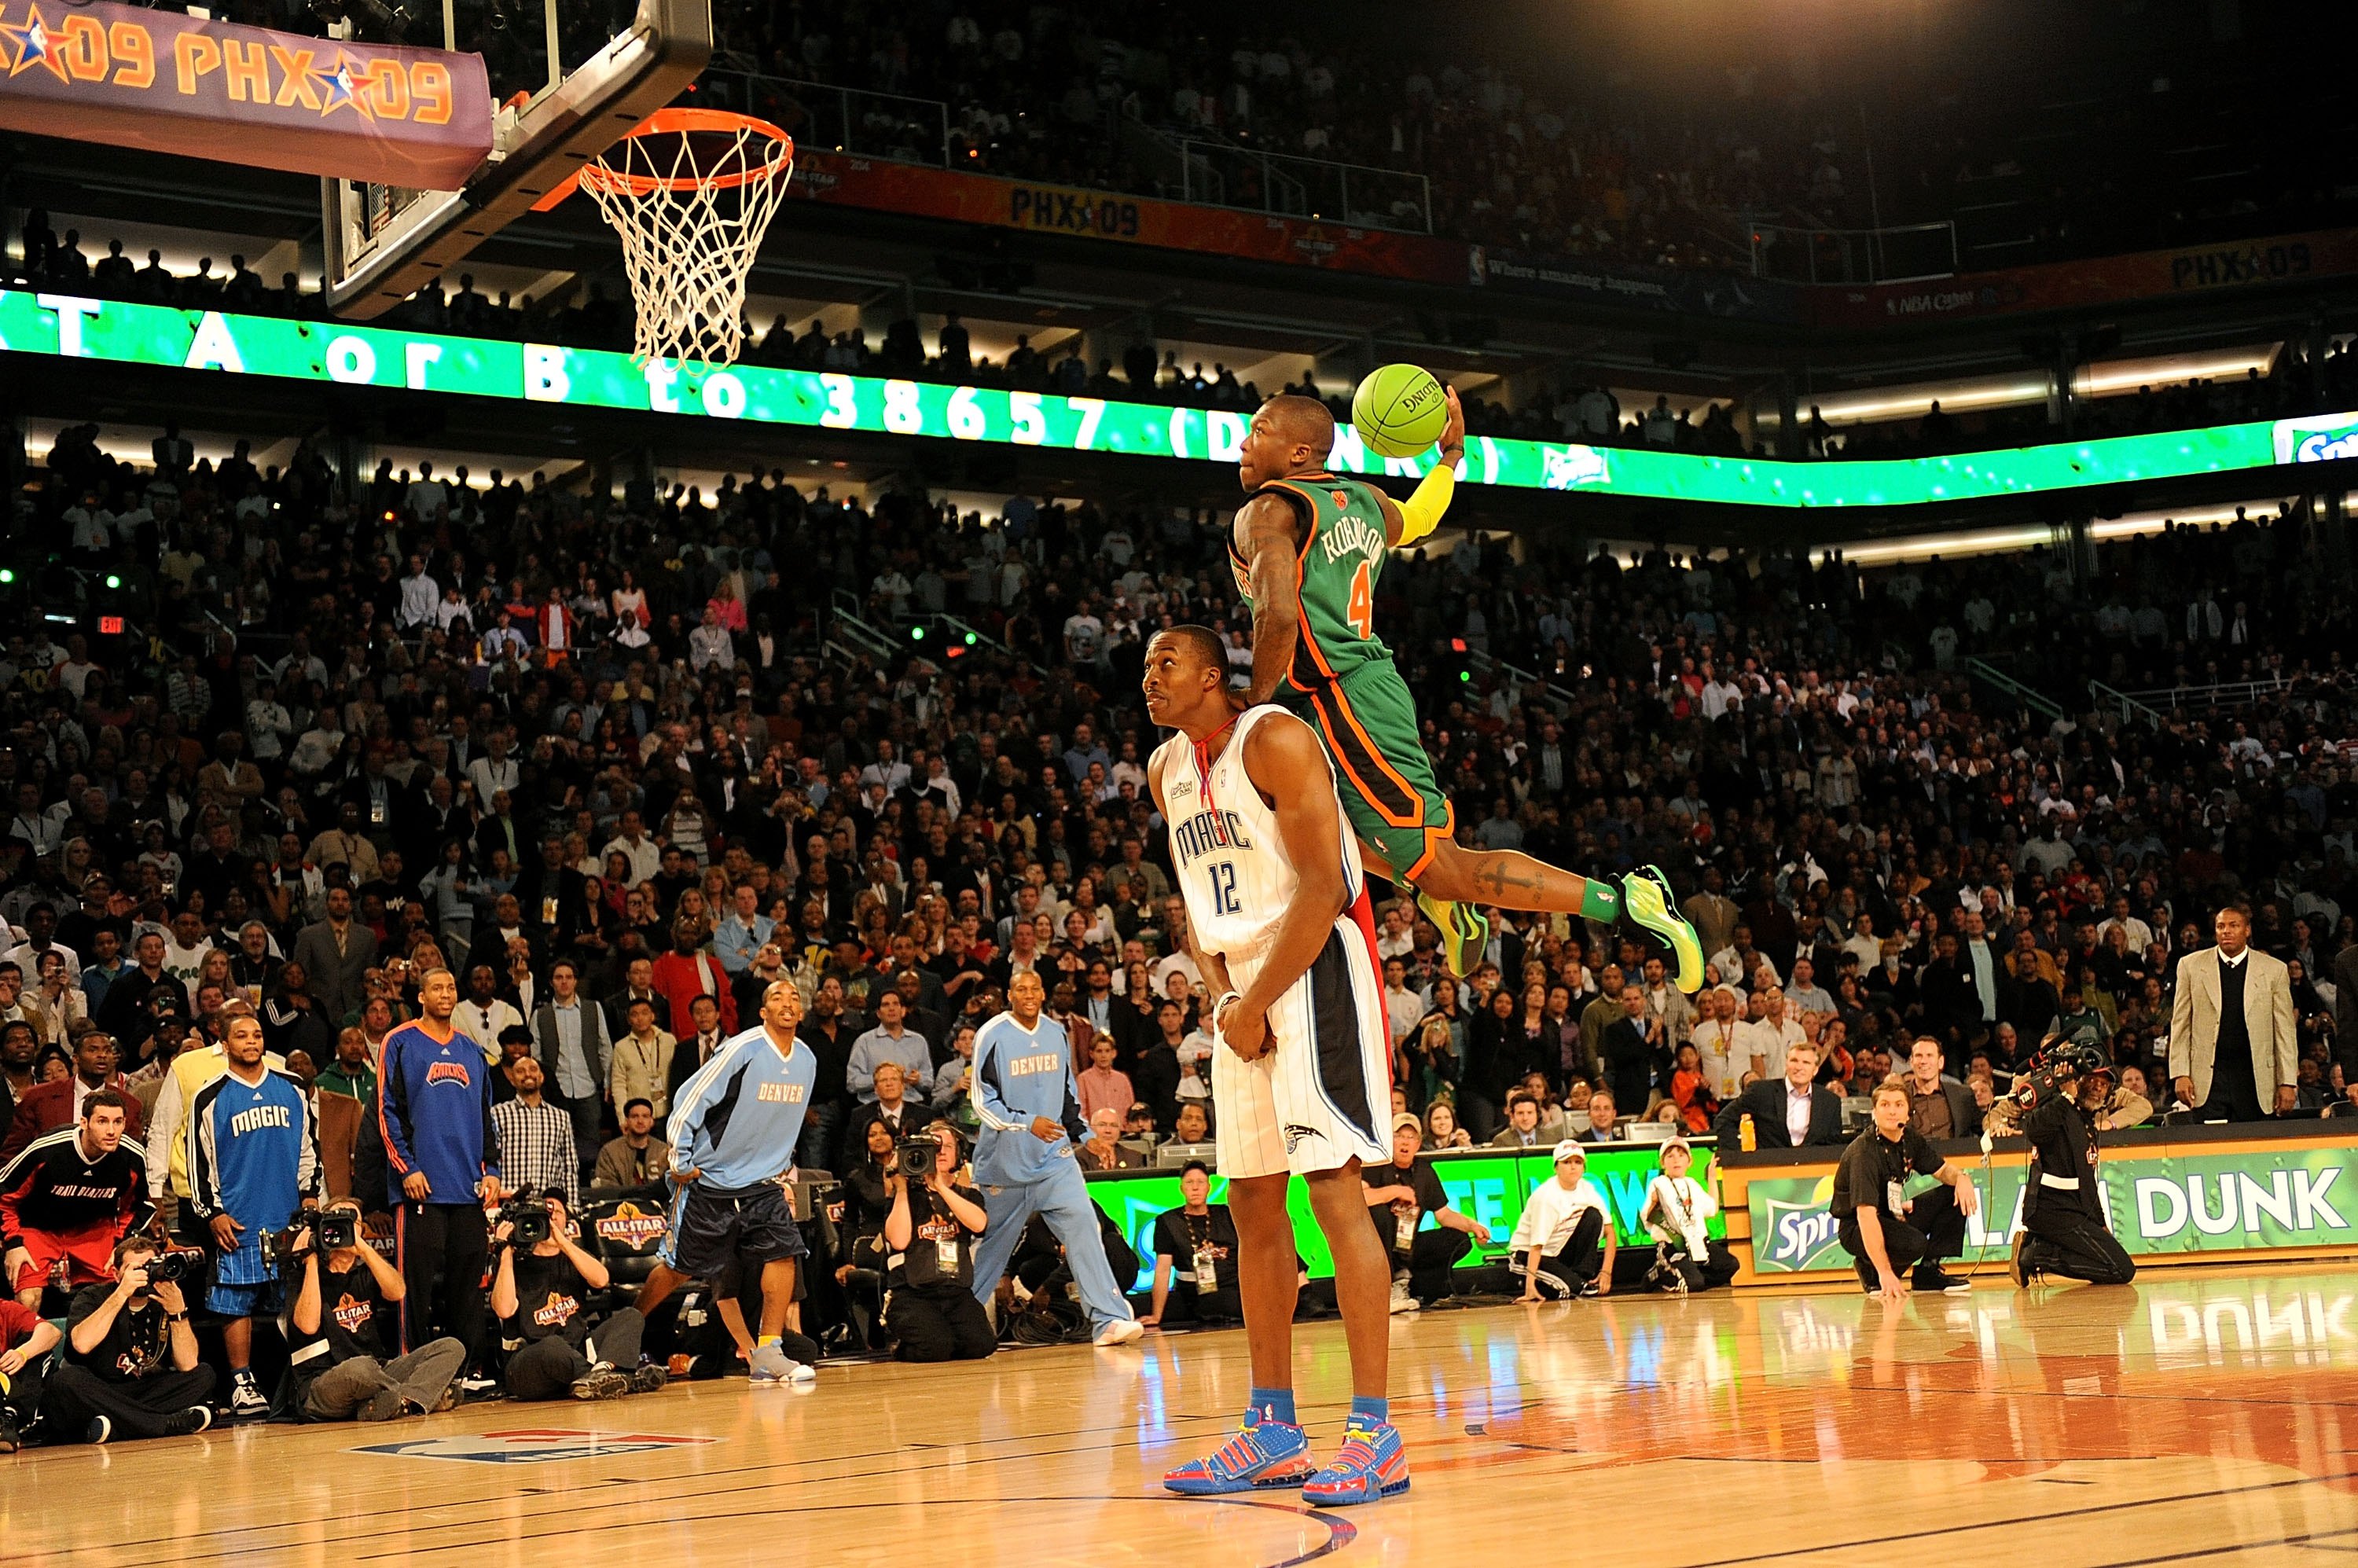 Gerald Green, from the Boston Celtics, jumps over a table to win the slam  dunk contest during NBA All-Star weekend in Las Vegas on Saturday, Feb. 17,  2007. (AP Photo/ Kevork Djansezian